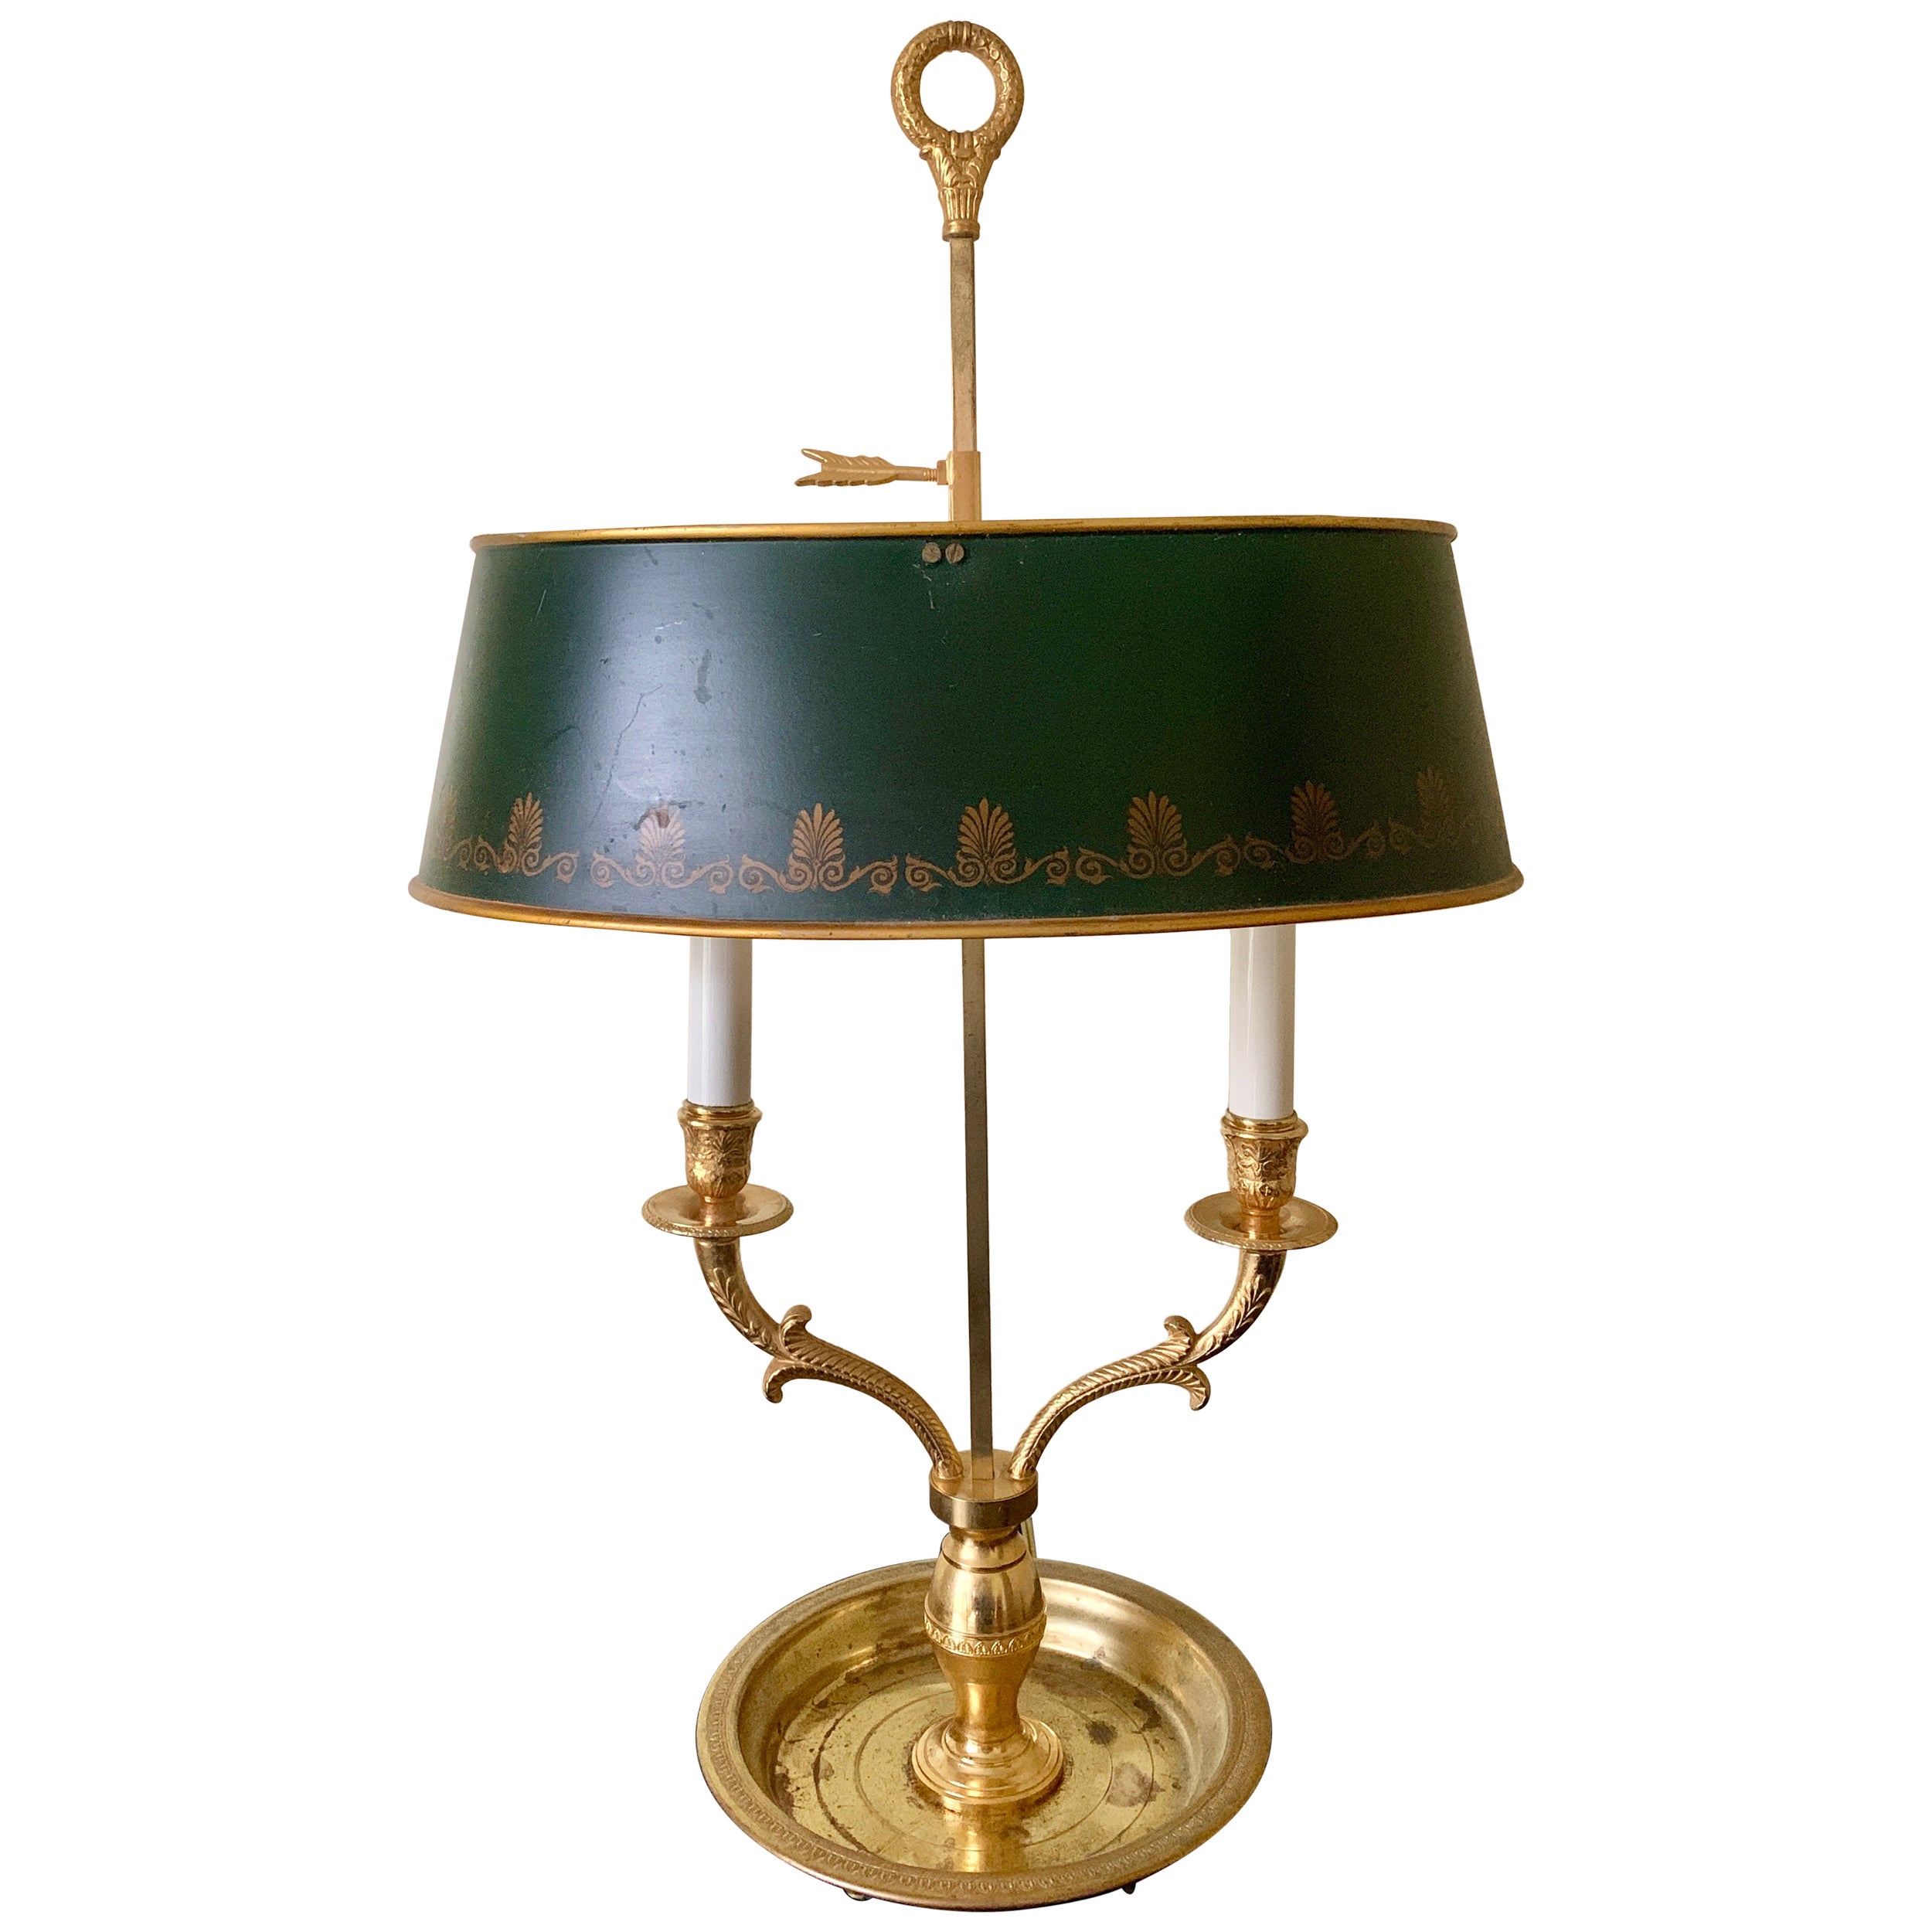 French Provincial Brass Bouillotte Lamp With Stenciled Green Tole Shade